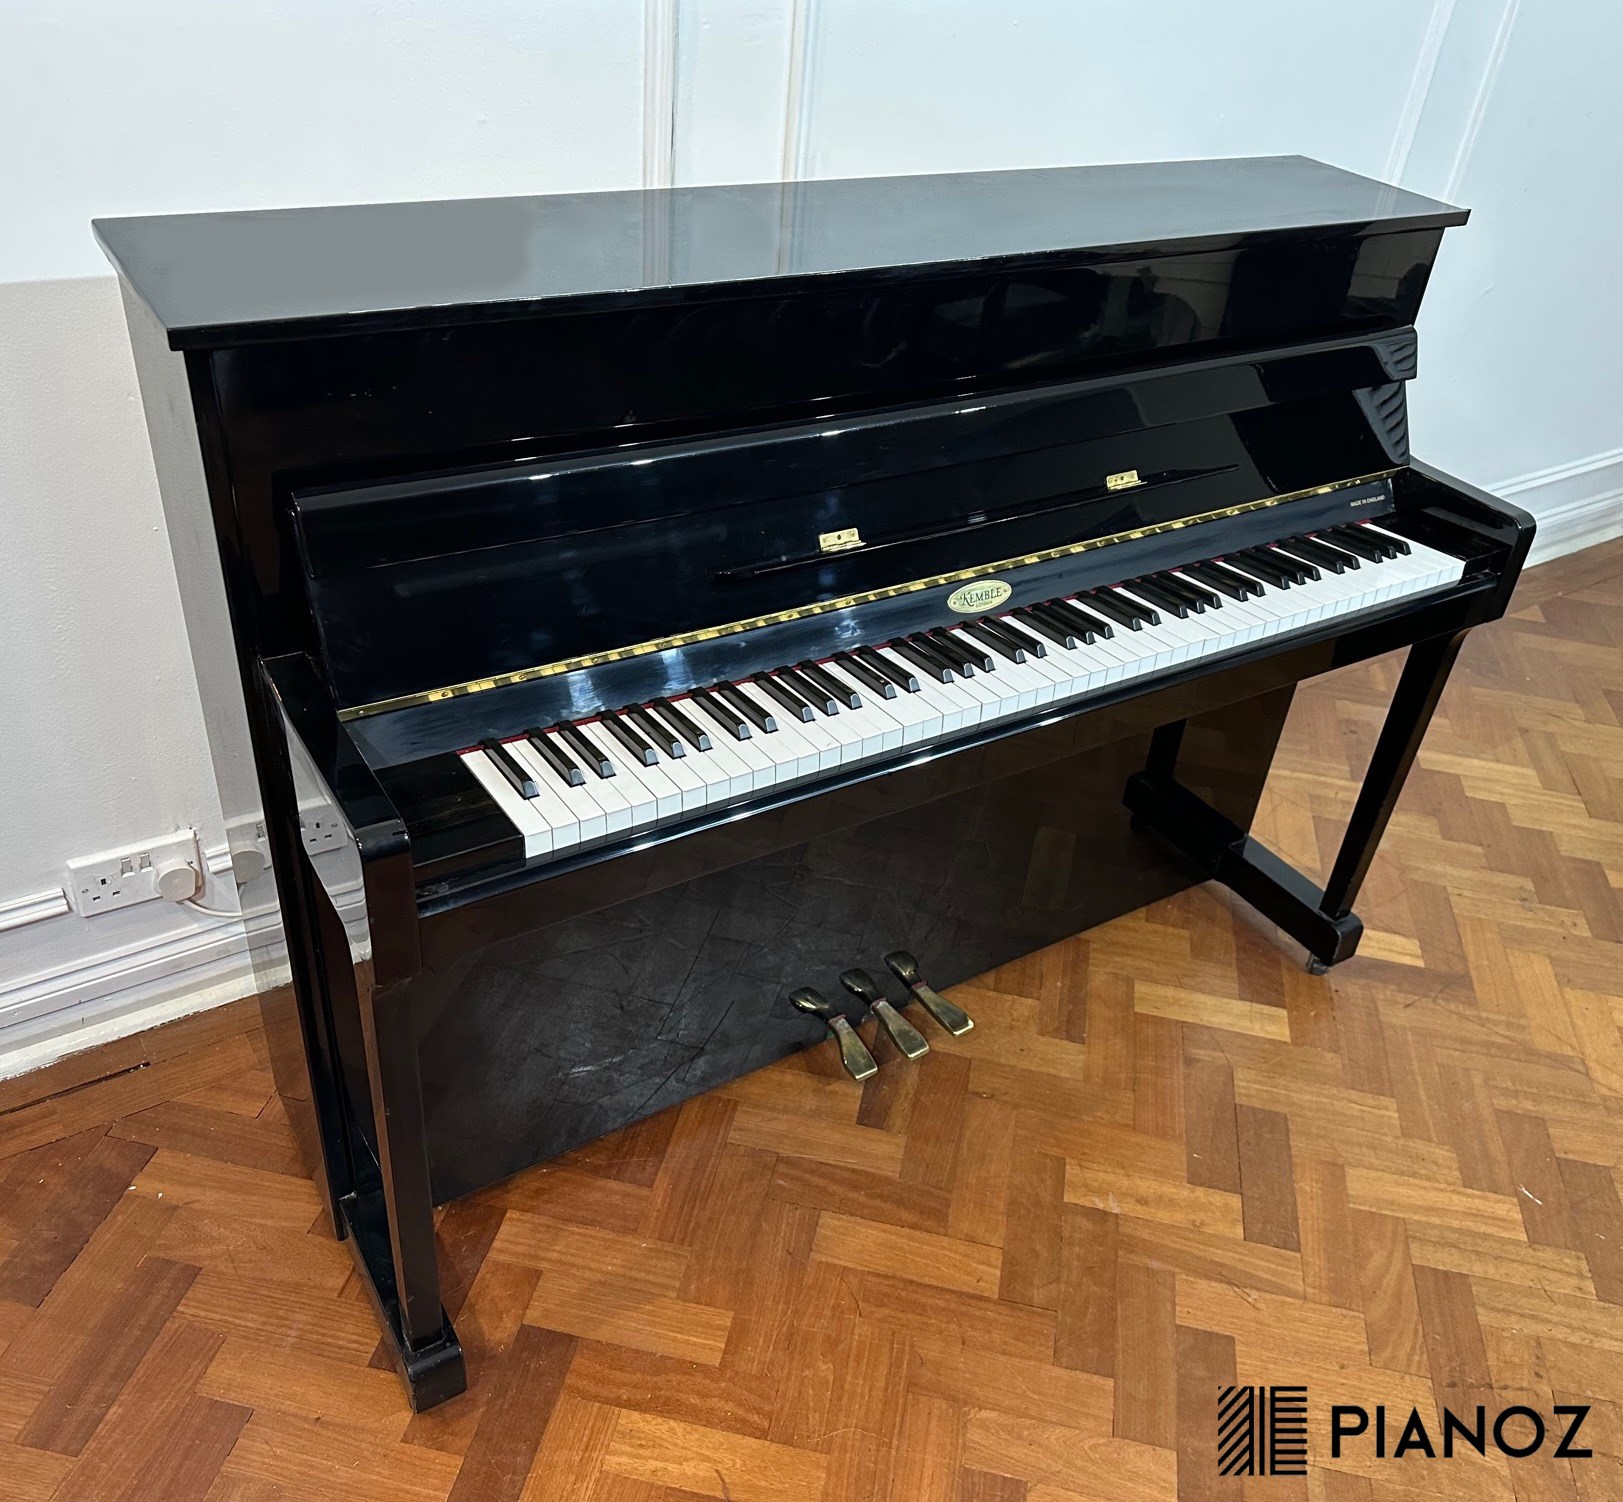 Kemble Oxford Upright Piano piano for sale in UK